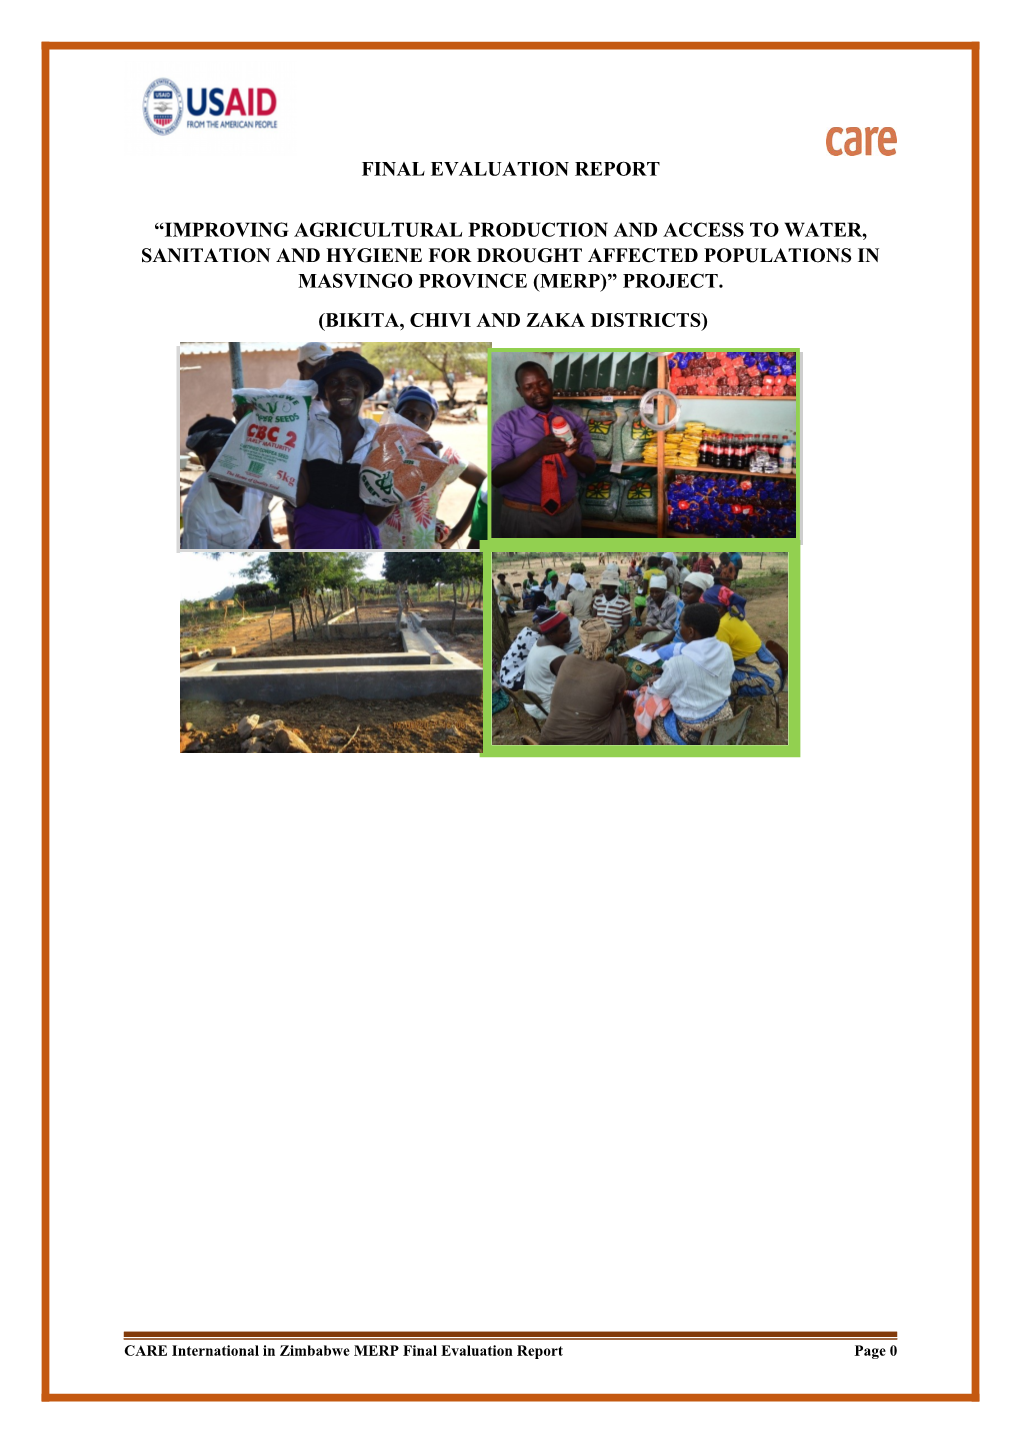 Final Evaluation Report “Improving Agricultural Production and Access to Water, Sanitation and Hygiene for Drought Affected Po